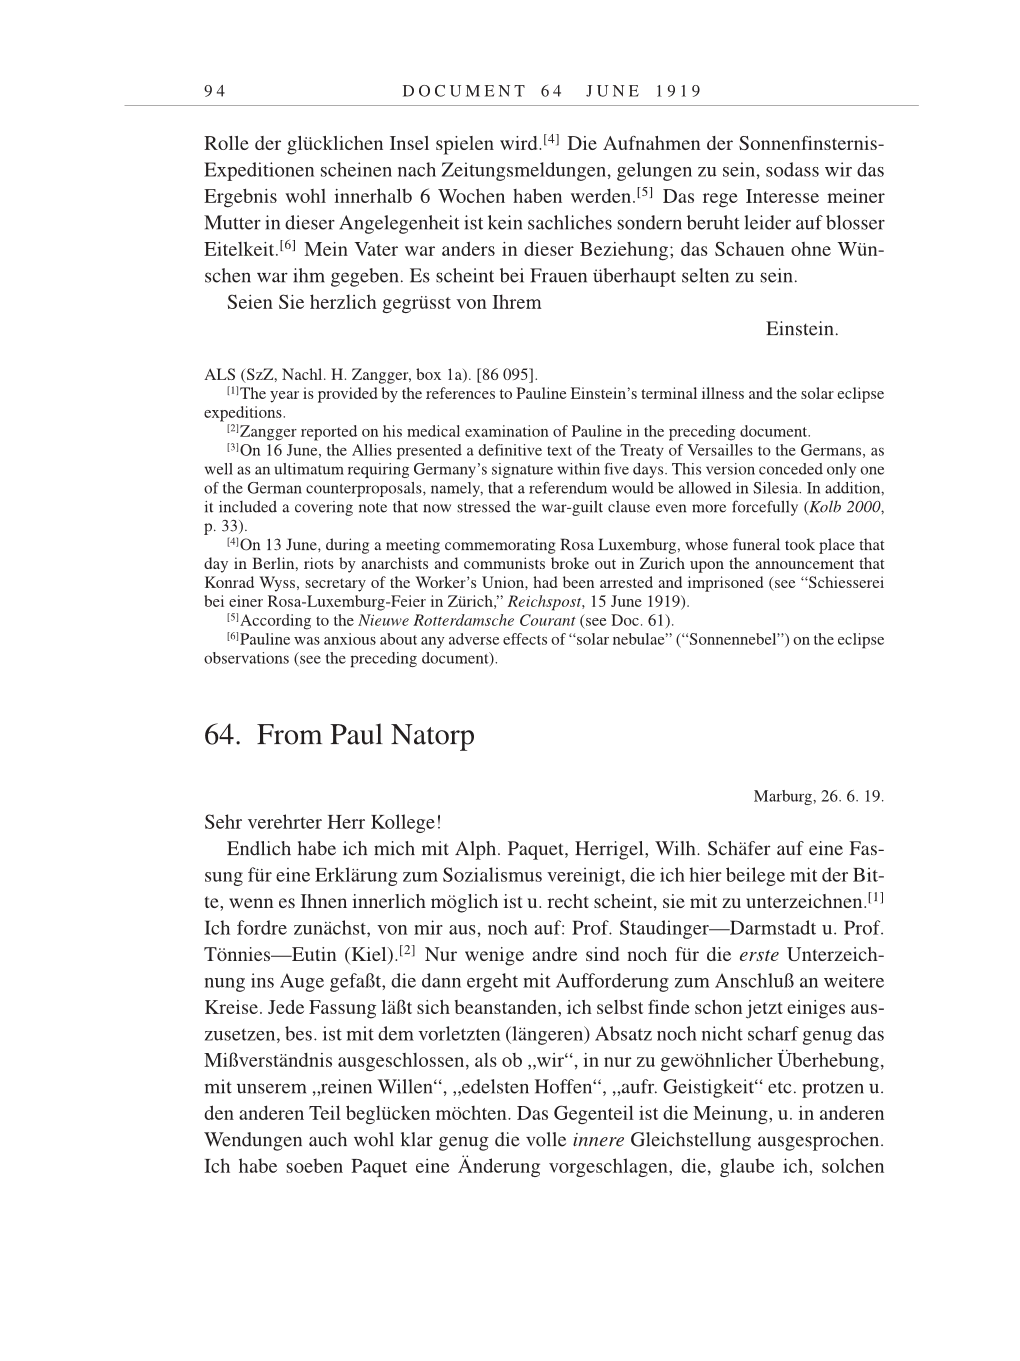 Volume 9: The Berlin Years: Correspondence January 1919-April 1920 page 94